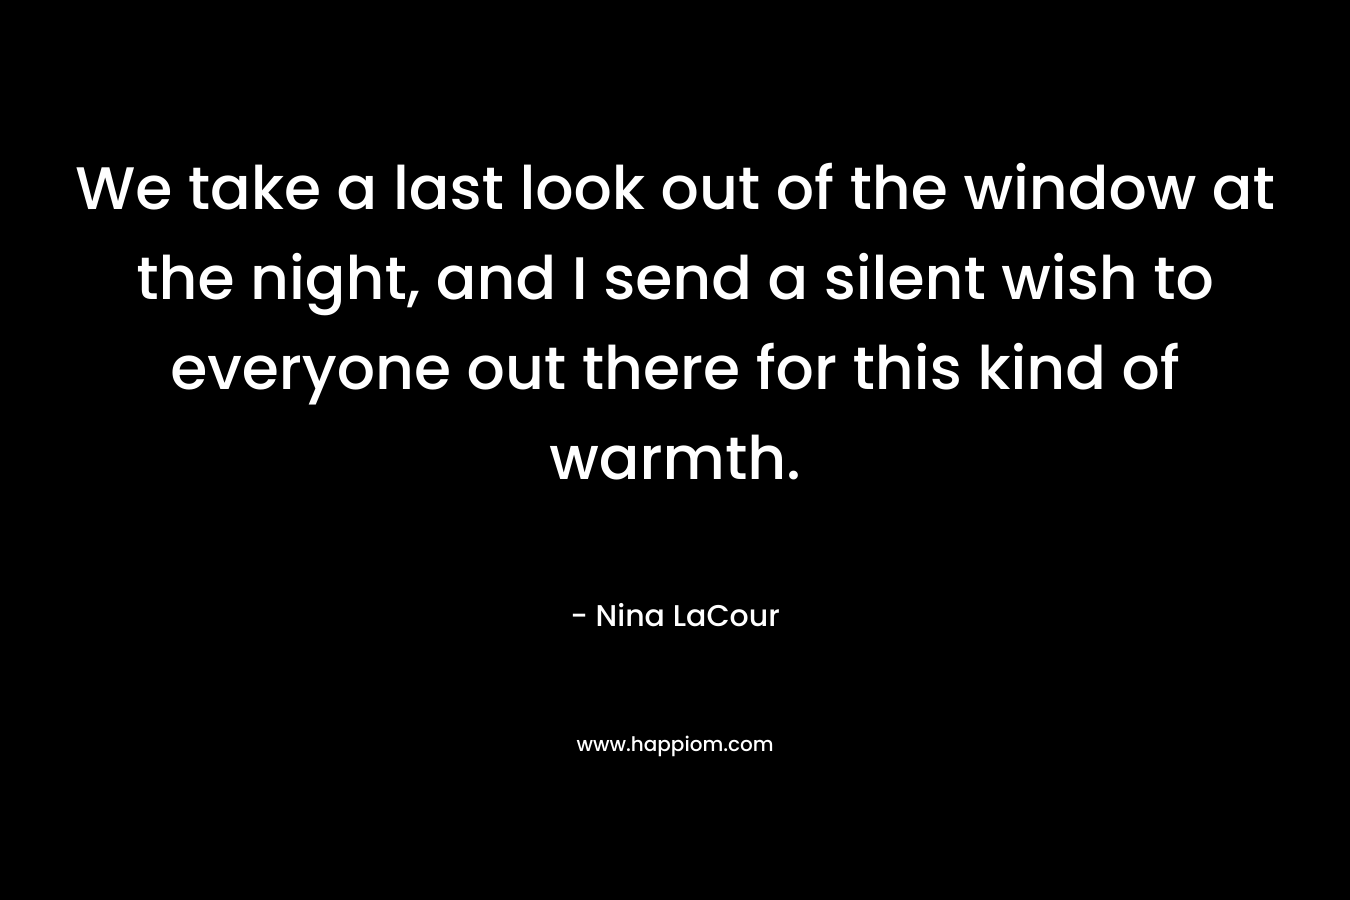 We take a last look out of the window at the night, and I send a silent wish to everyone out there for this kind of warmth. – Nina LaCour